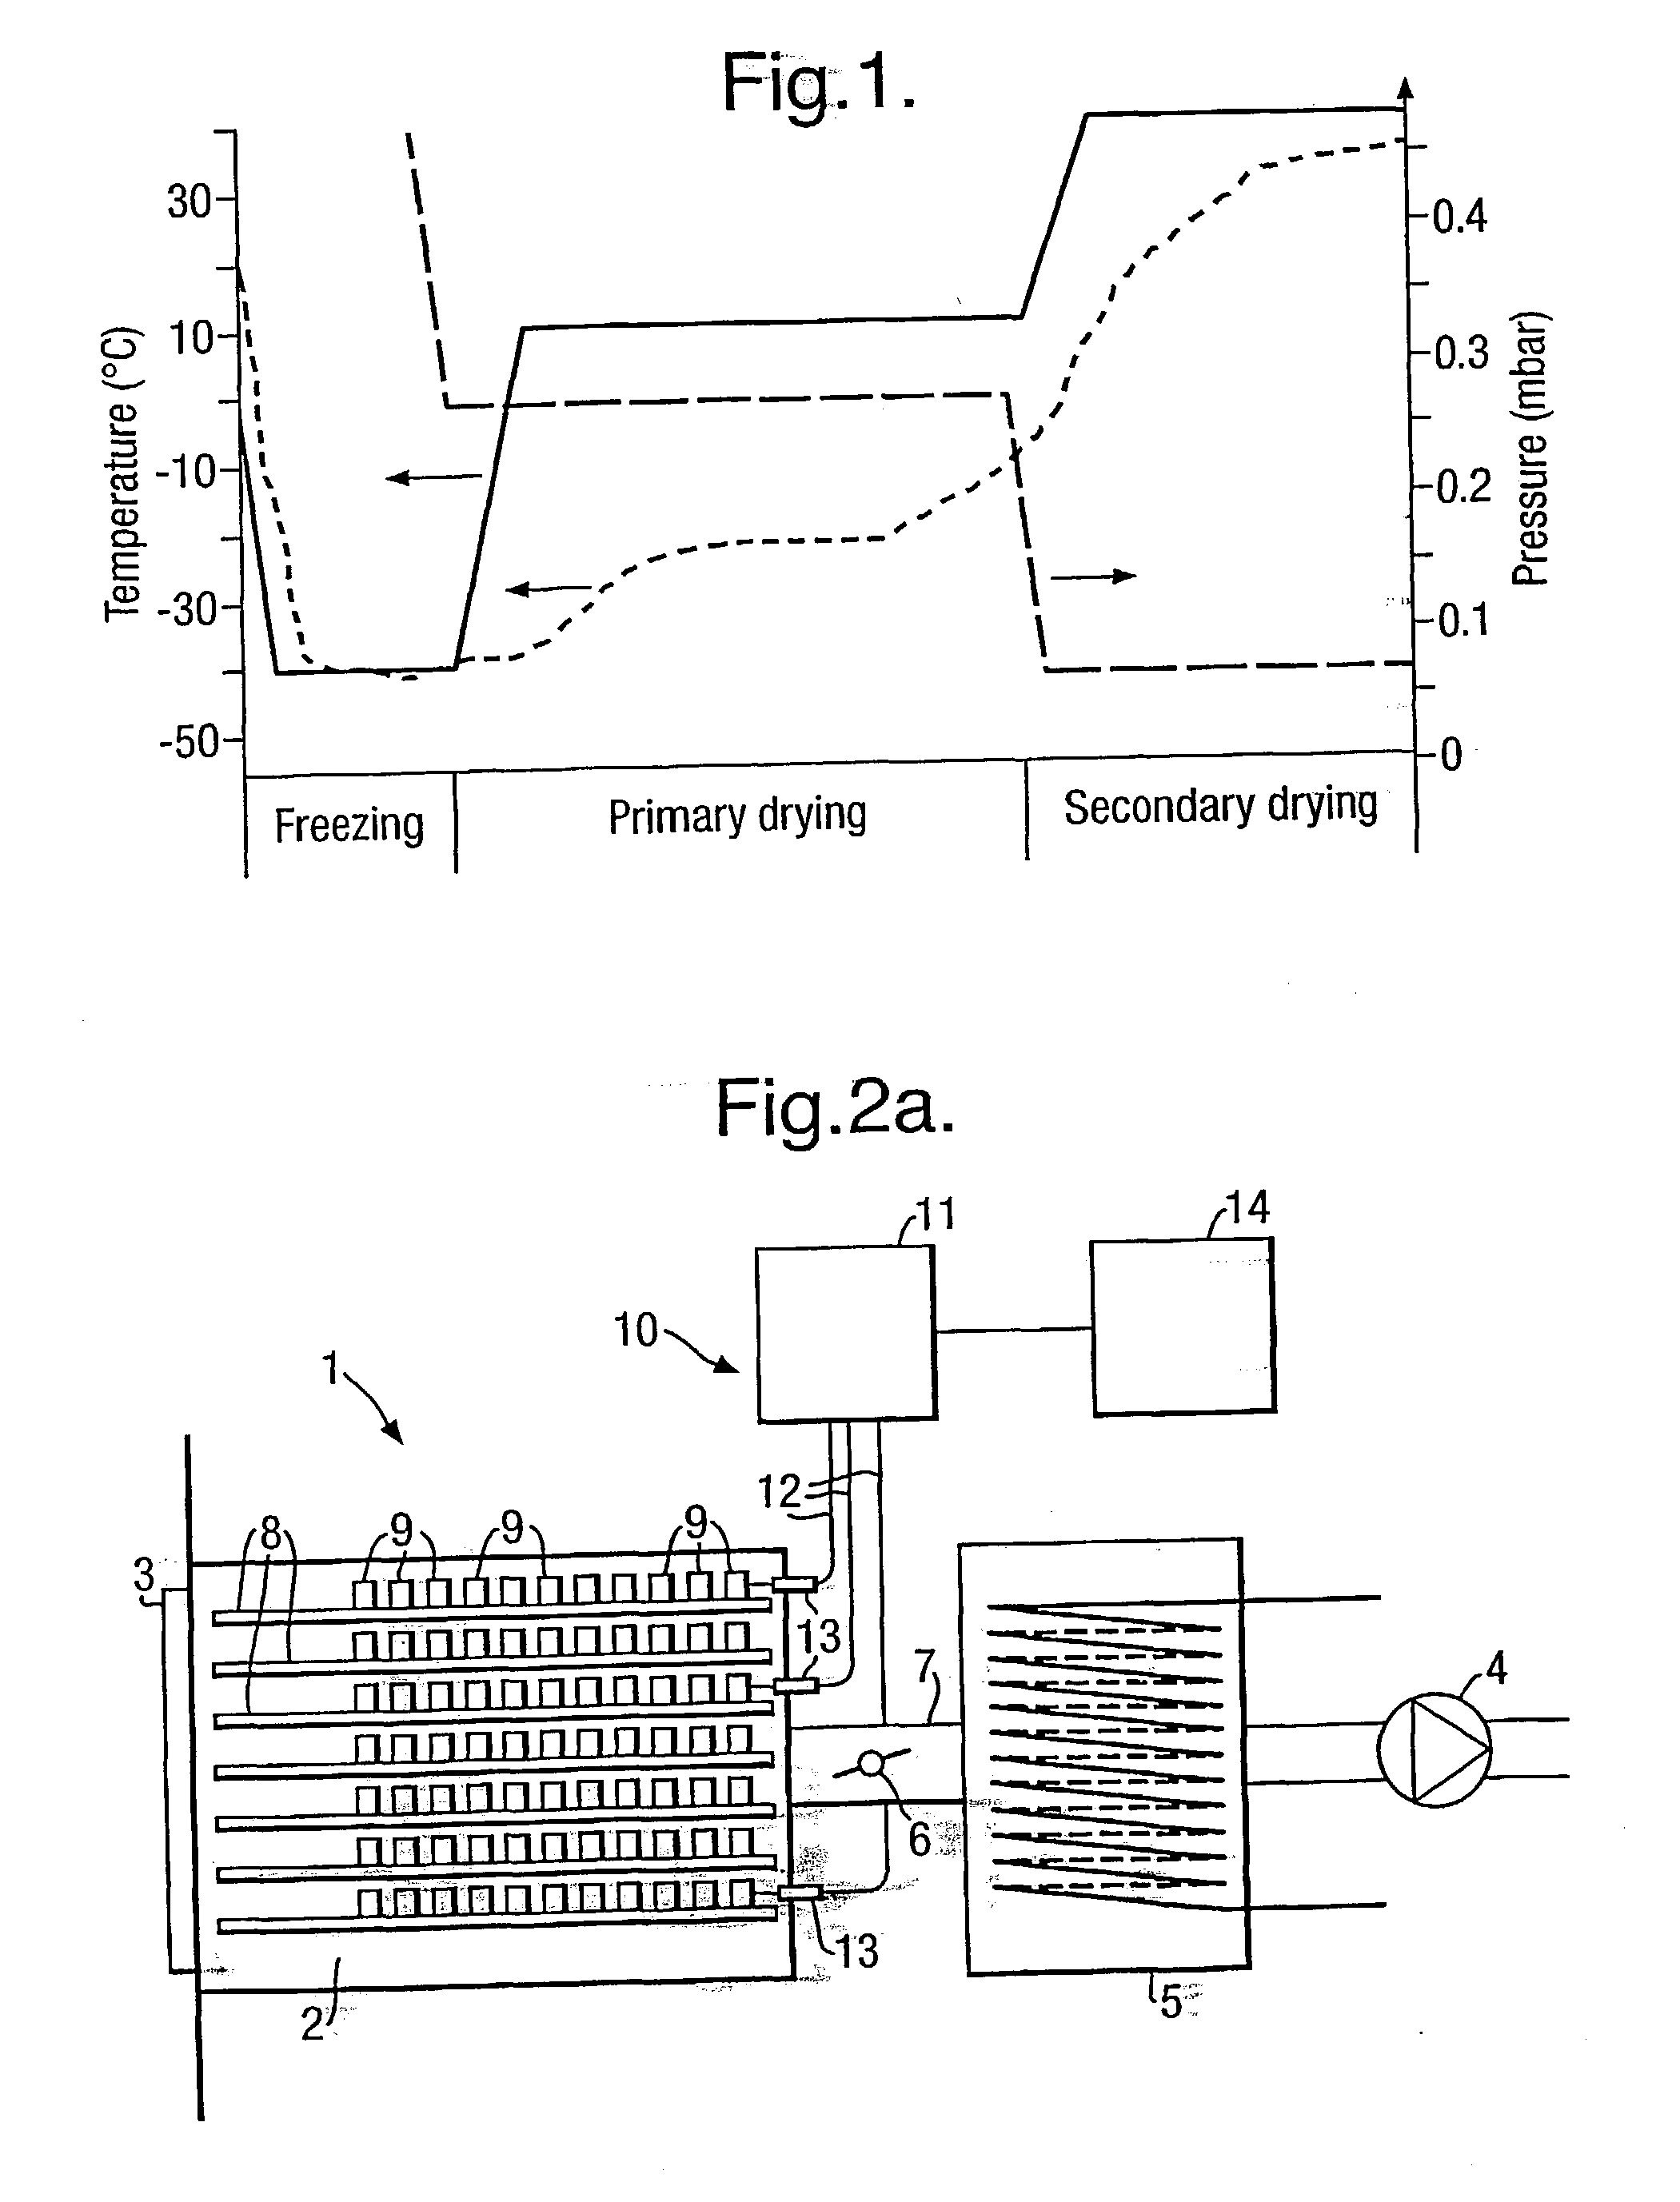 Method of monitoring a freeze drying process